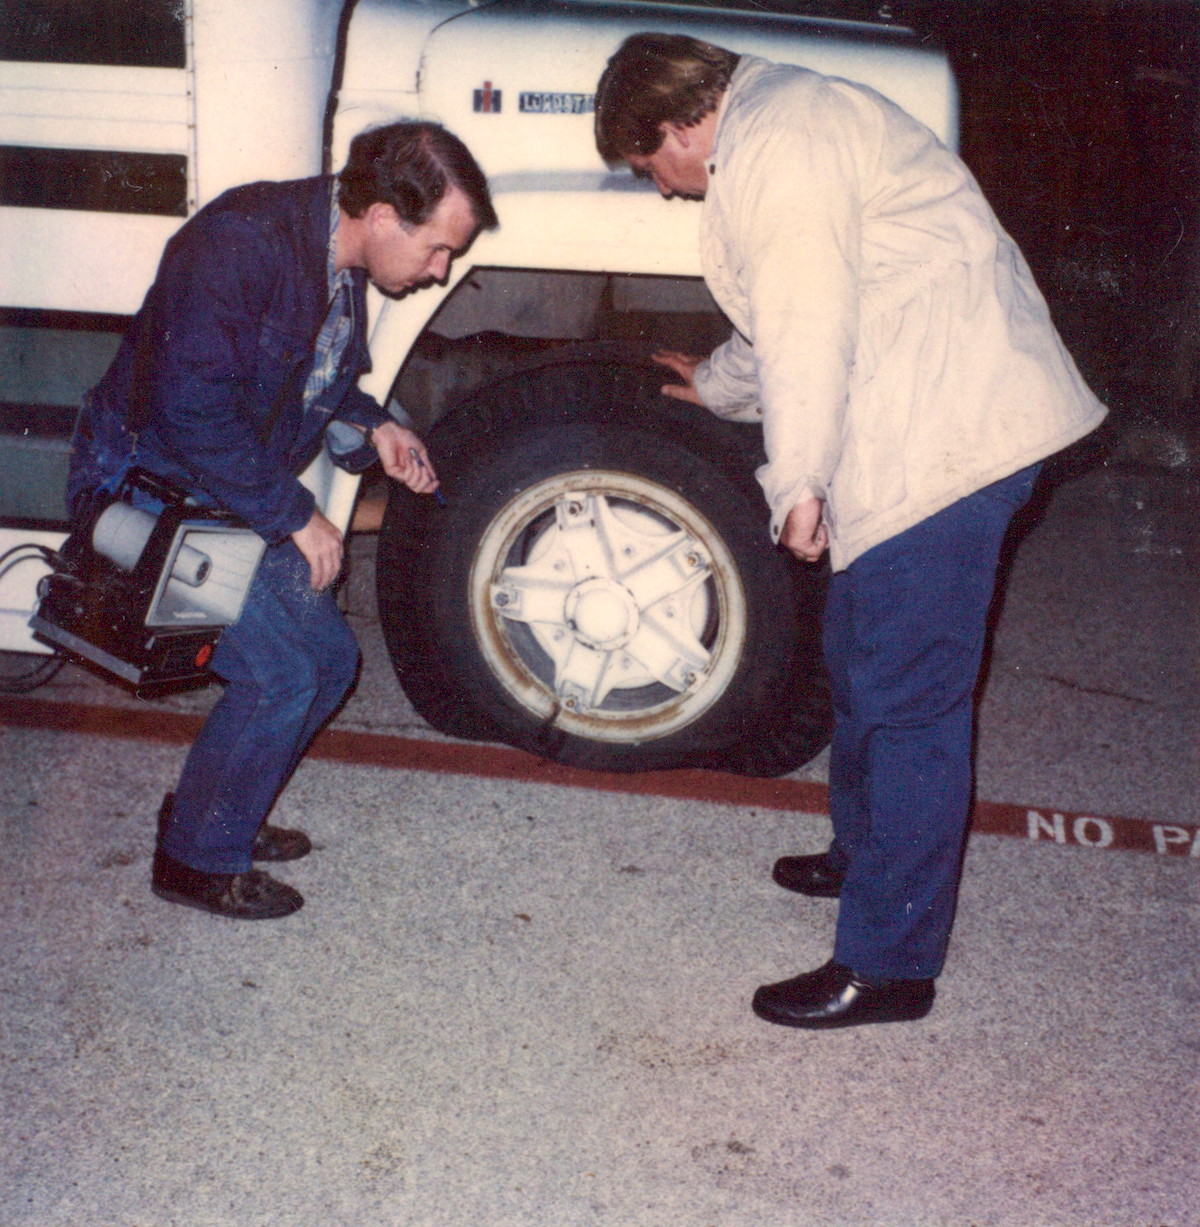 Unidentified Christians inspecting their flat tires in Dallas, TX, circa 1982. William shares, “A fundamentalist church would send its followers to the “Gay Crossroads” Cedar Springs area on weekends to “minister” to LGBTQ people on the street, who were coming out of our store or local bars. The “preachers” were rude and obnoxious, so one night several of us found their bus parked several blocks away and removed the valve stems from their tires.” Photo courtesy of William Waybourn.